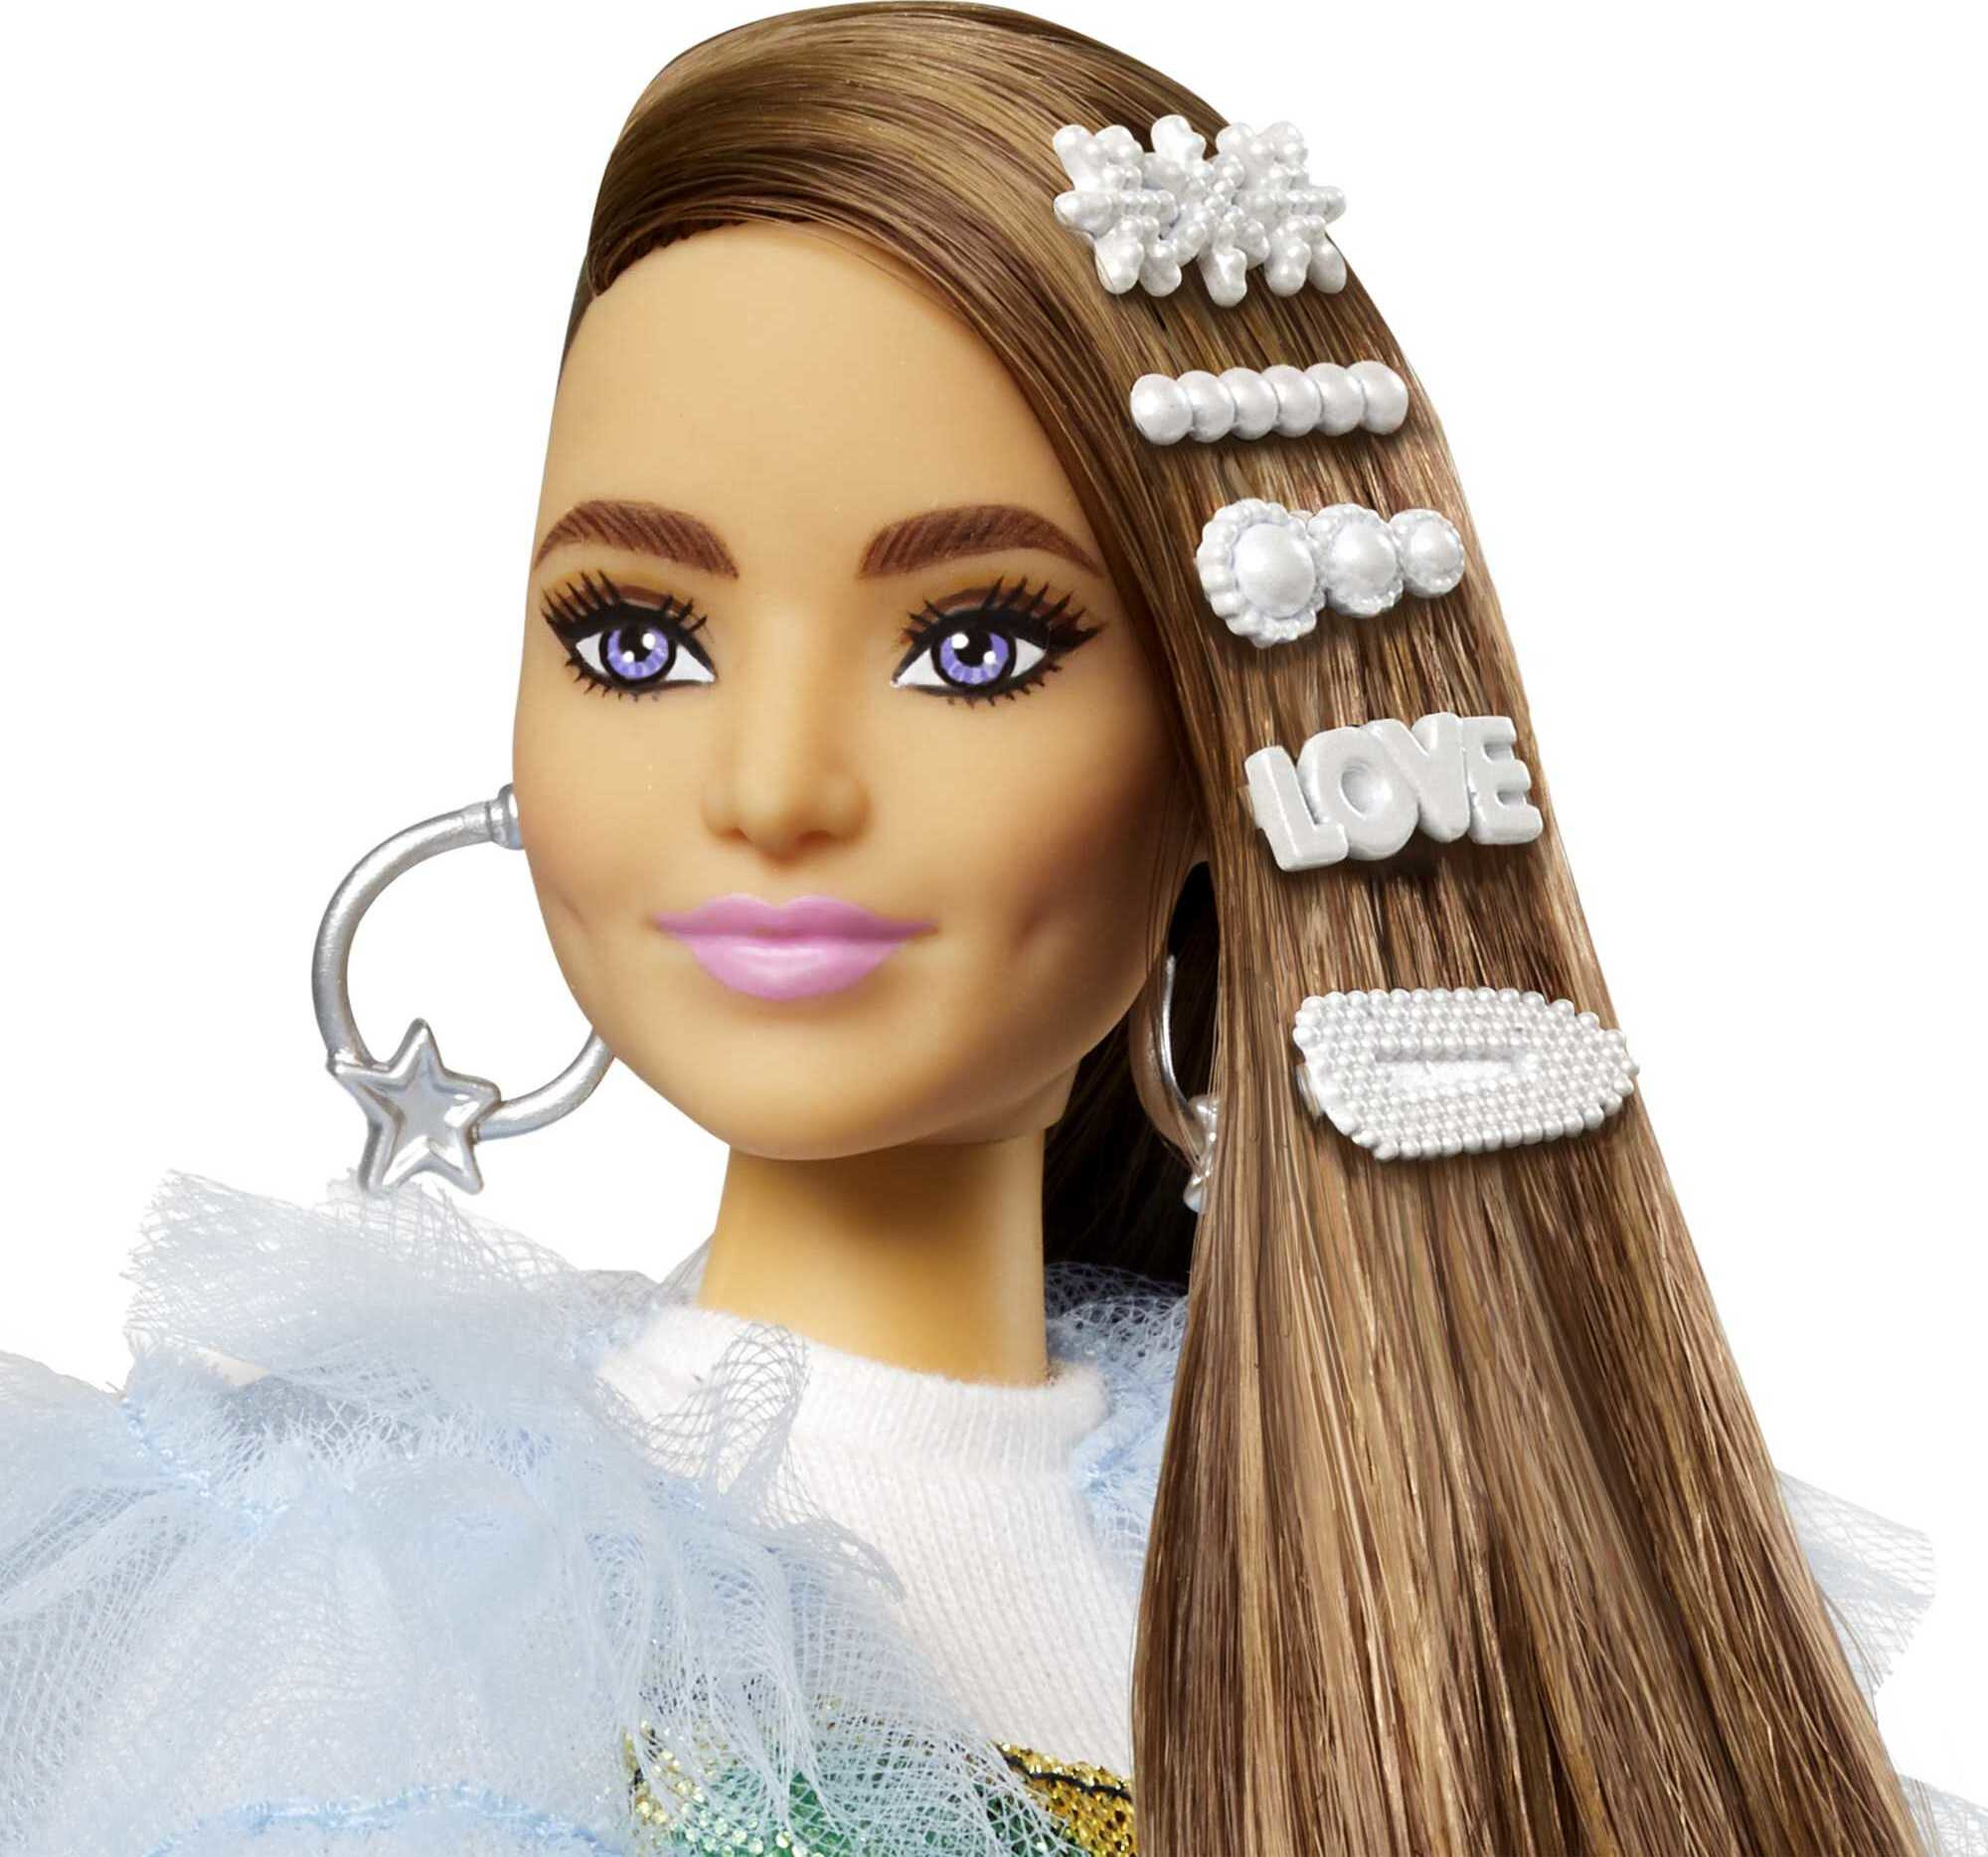 Barbie Extra Fashion Doll with Long Brunette Hair & Bling Clips in Dress with Accessories & Pet - image 4 of 7